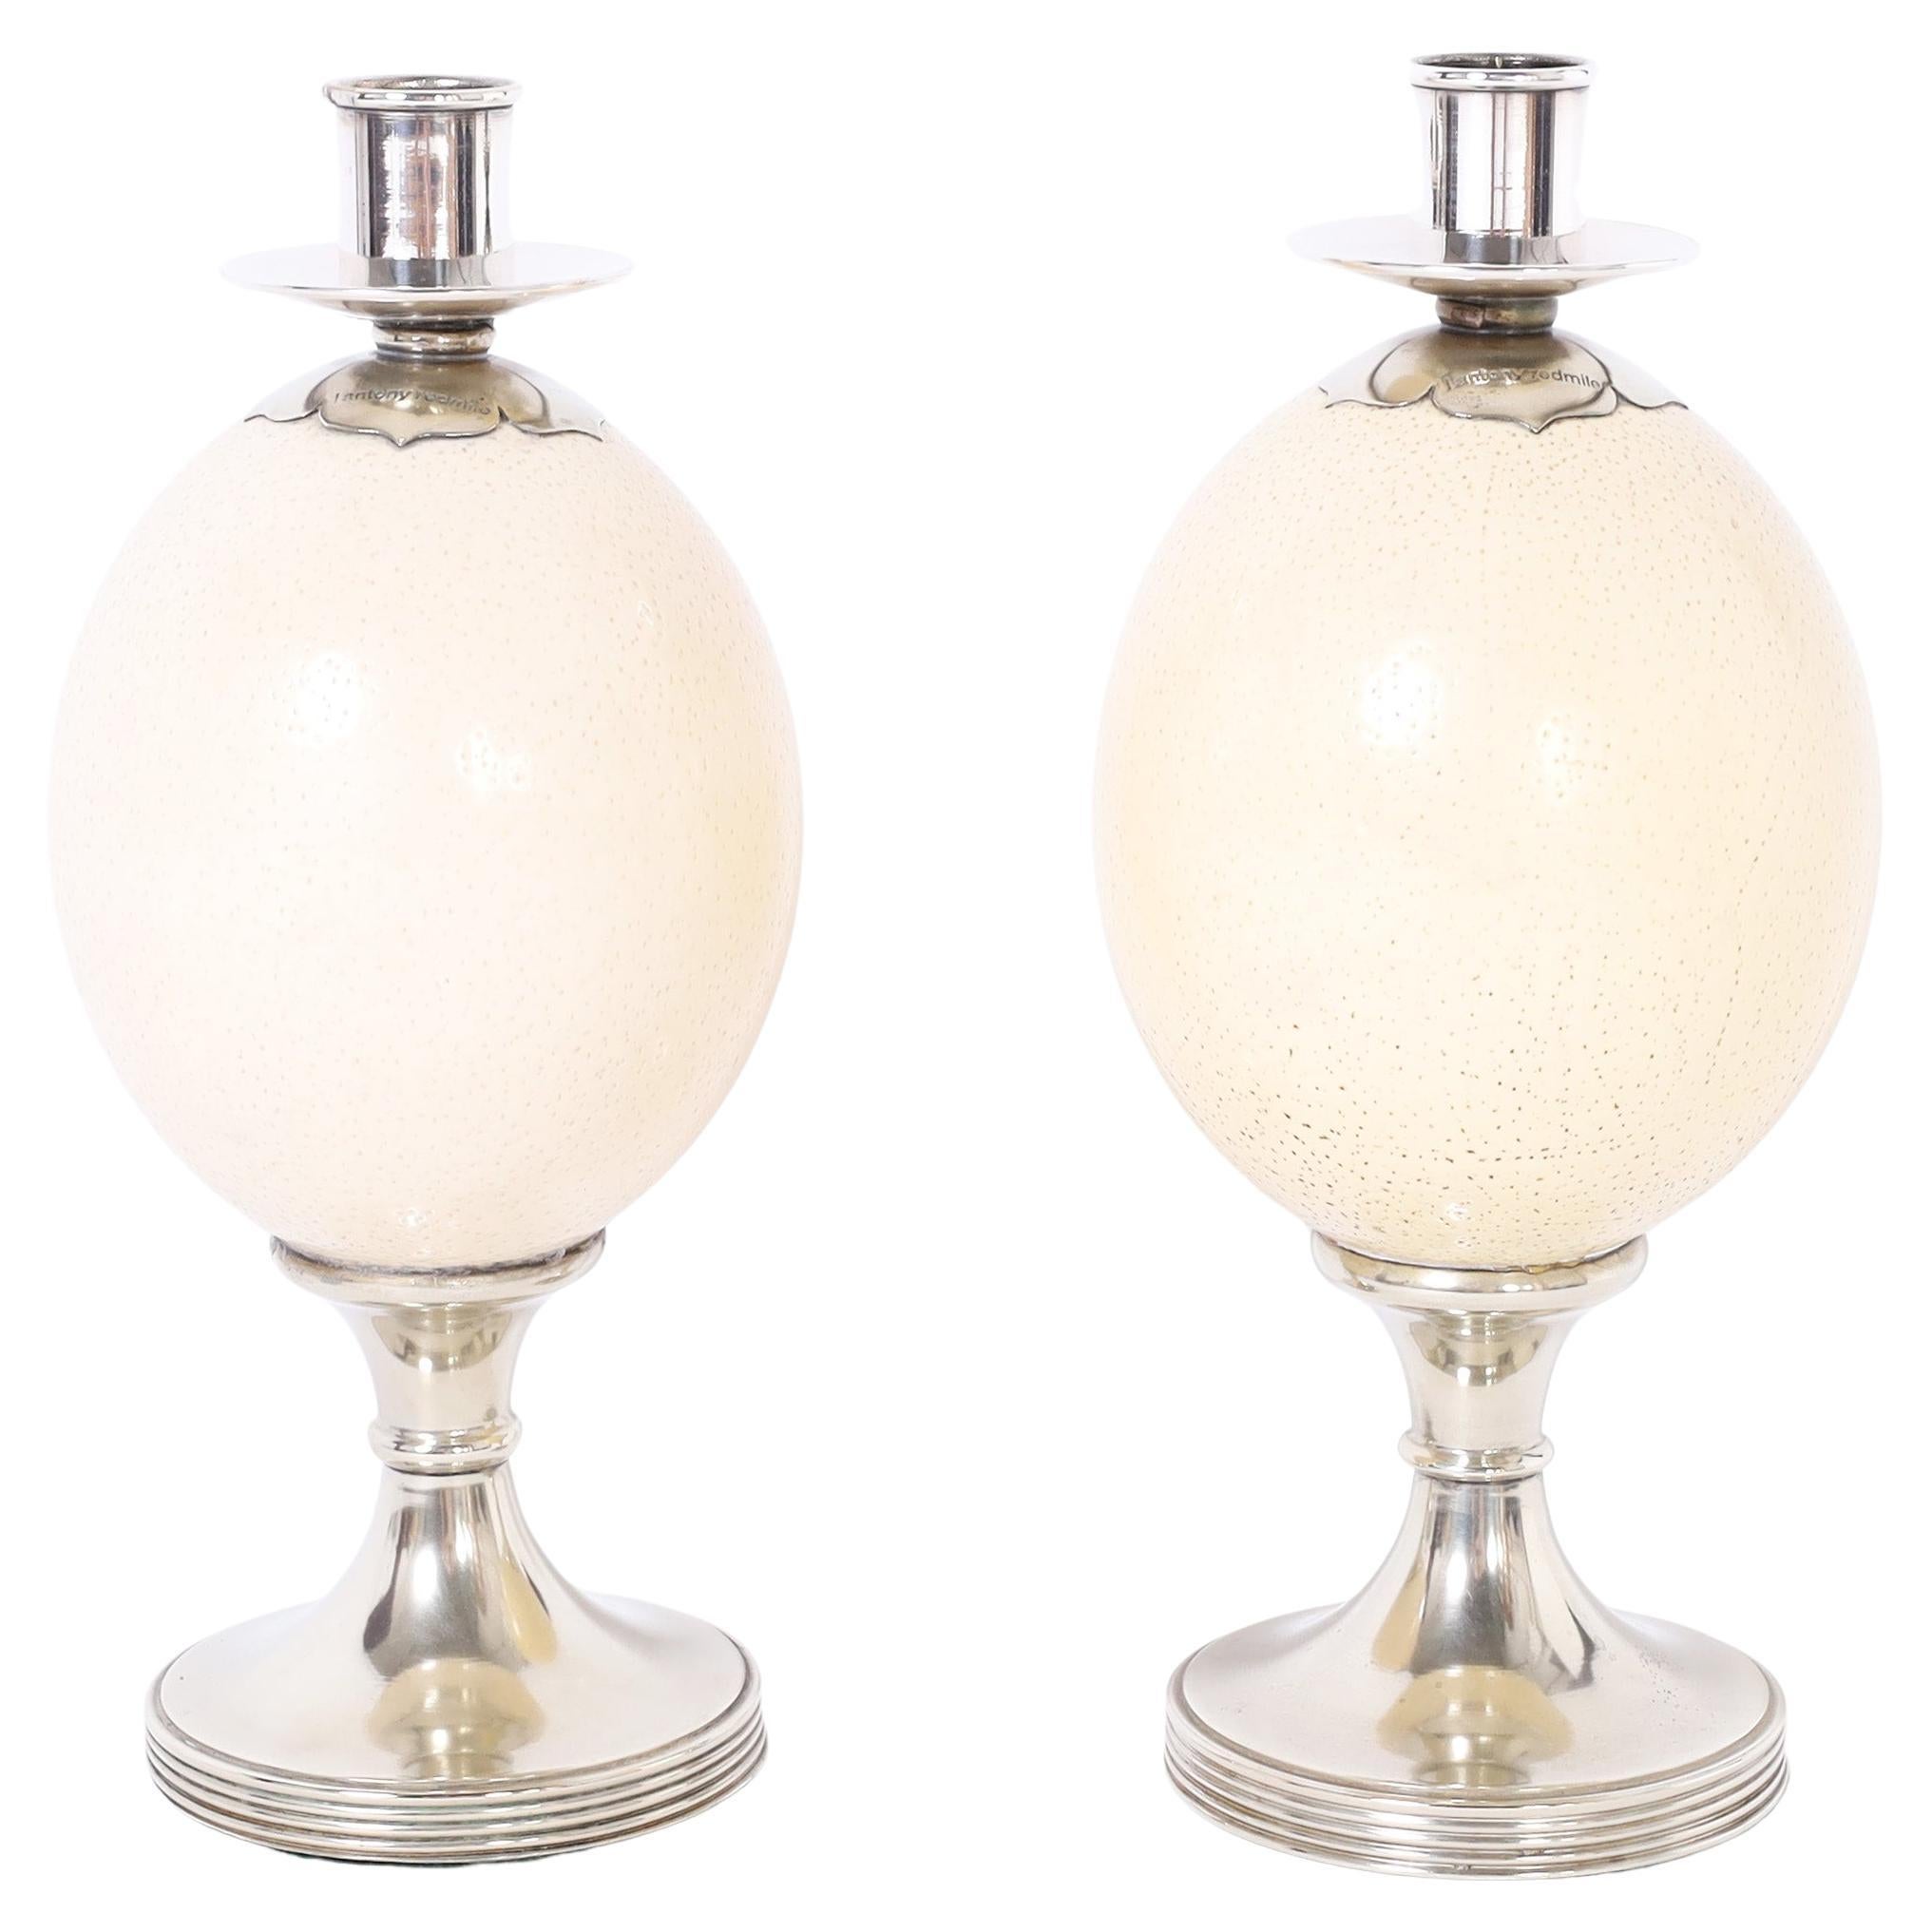 Ostrich Eggshell Candle Holders